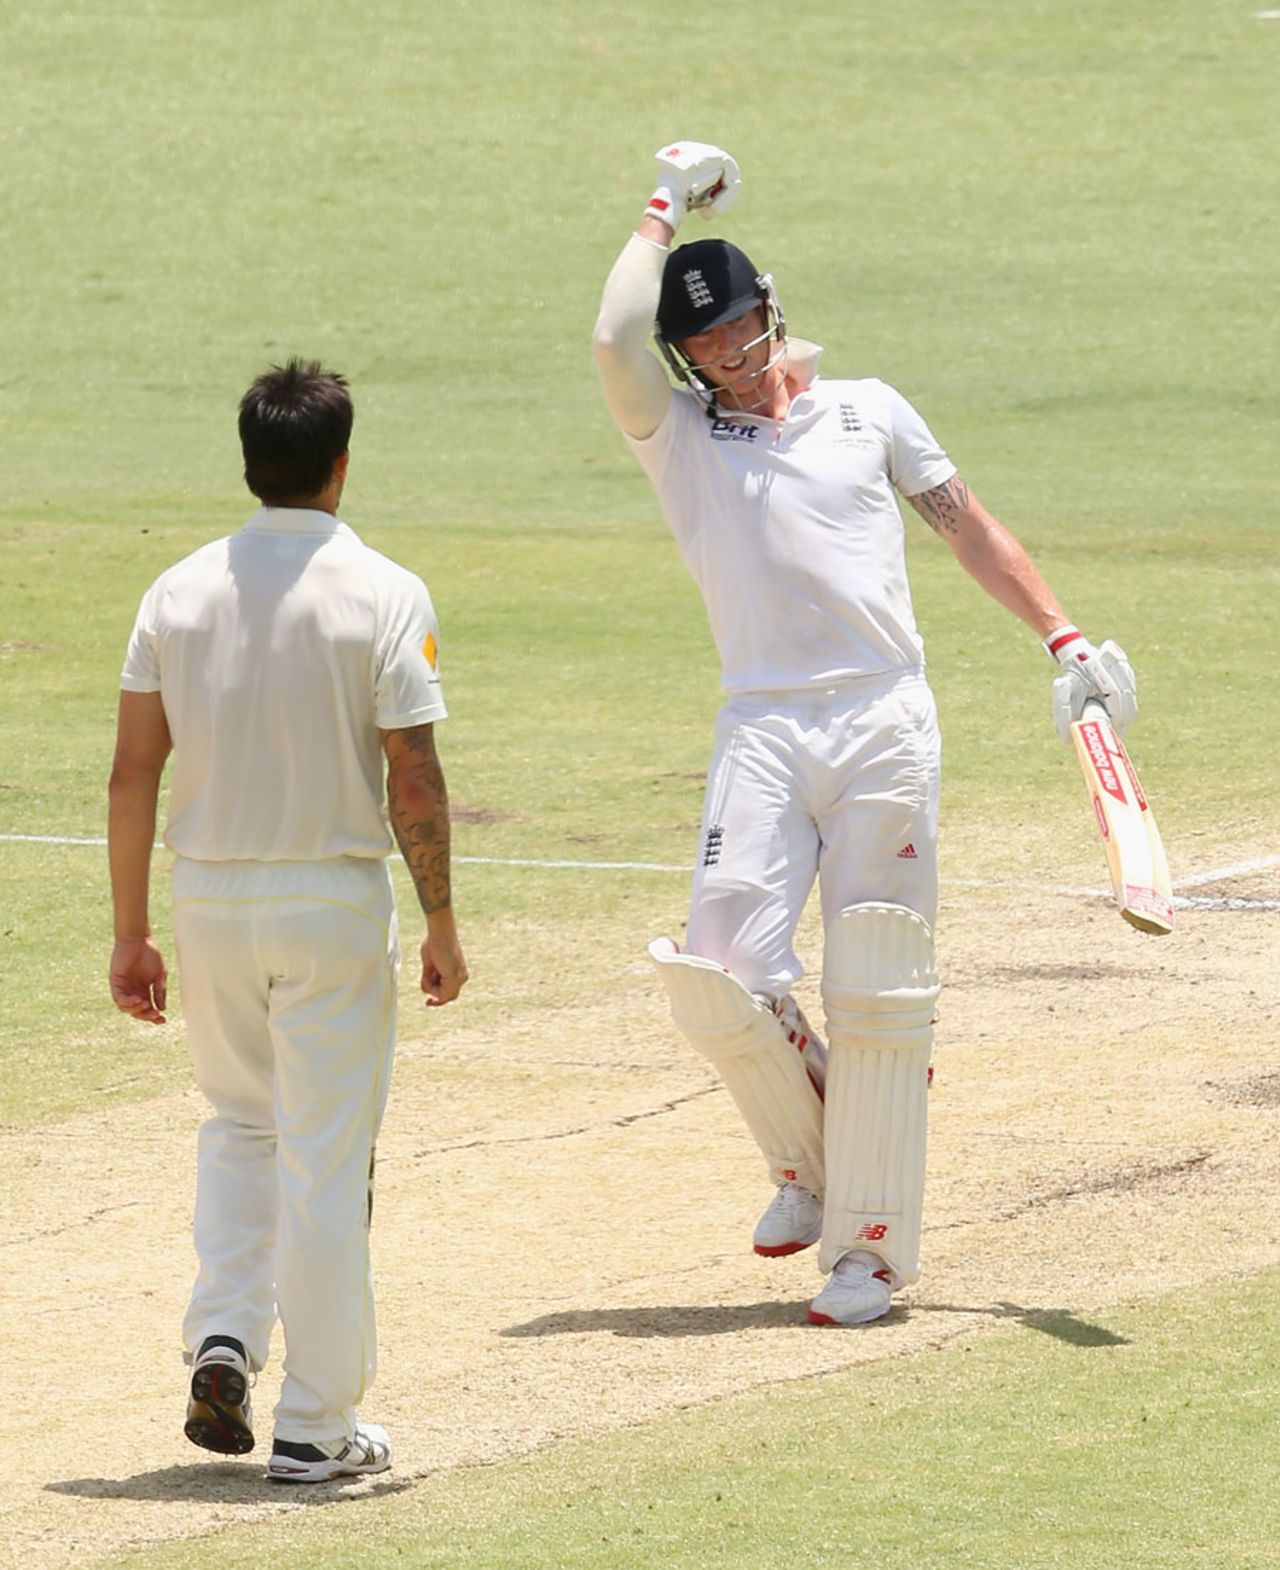 Ben Stokes pumps a fist after reaching his hundred, Australia v England, Test, Perth, 5th day, December 17, 2013